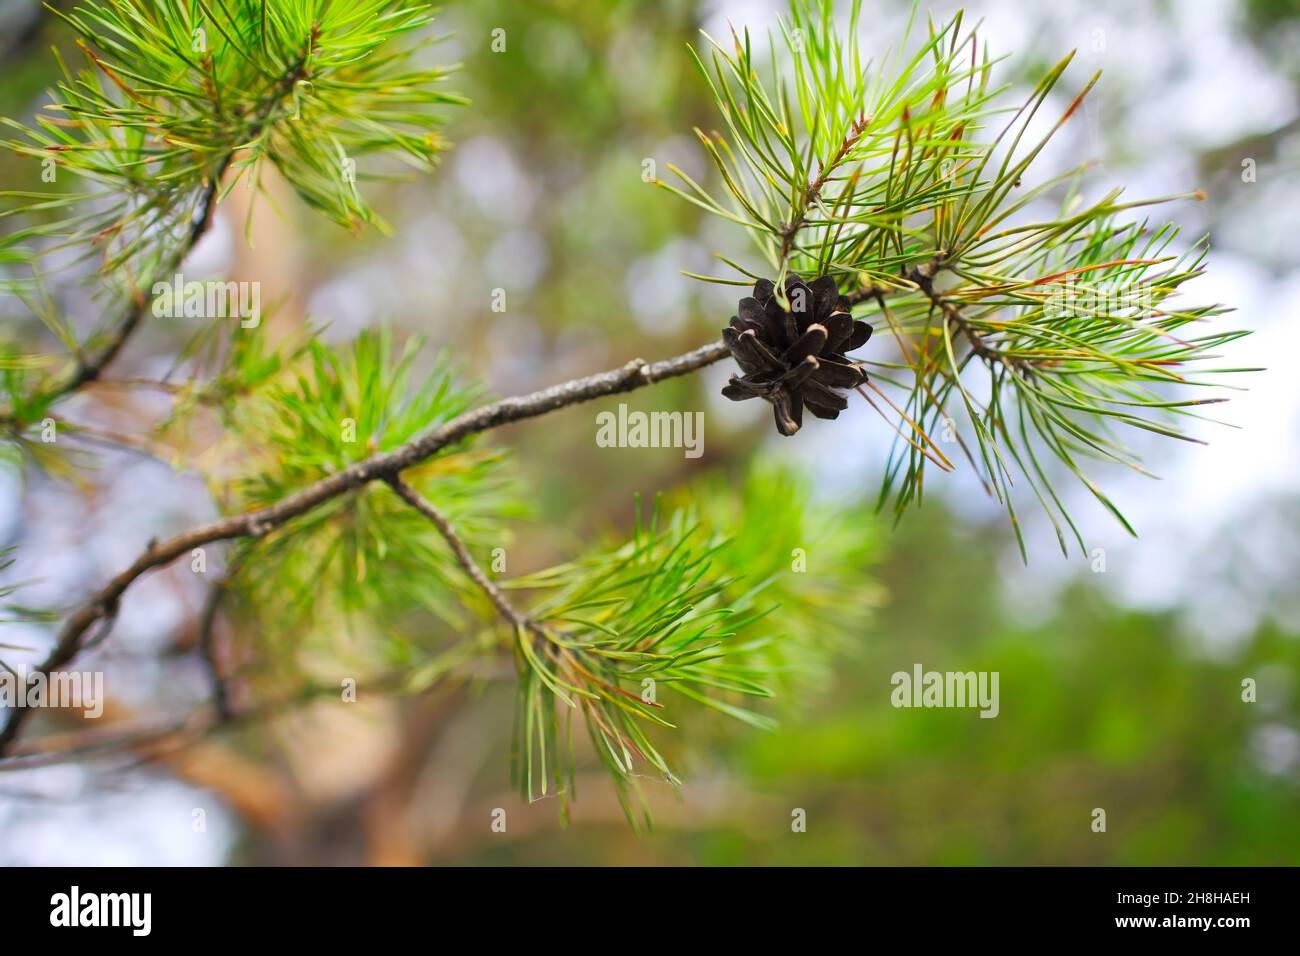 Green pine tree with the pinecone on the sprouts. Stock Photo